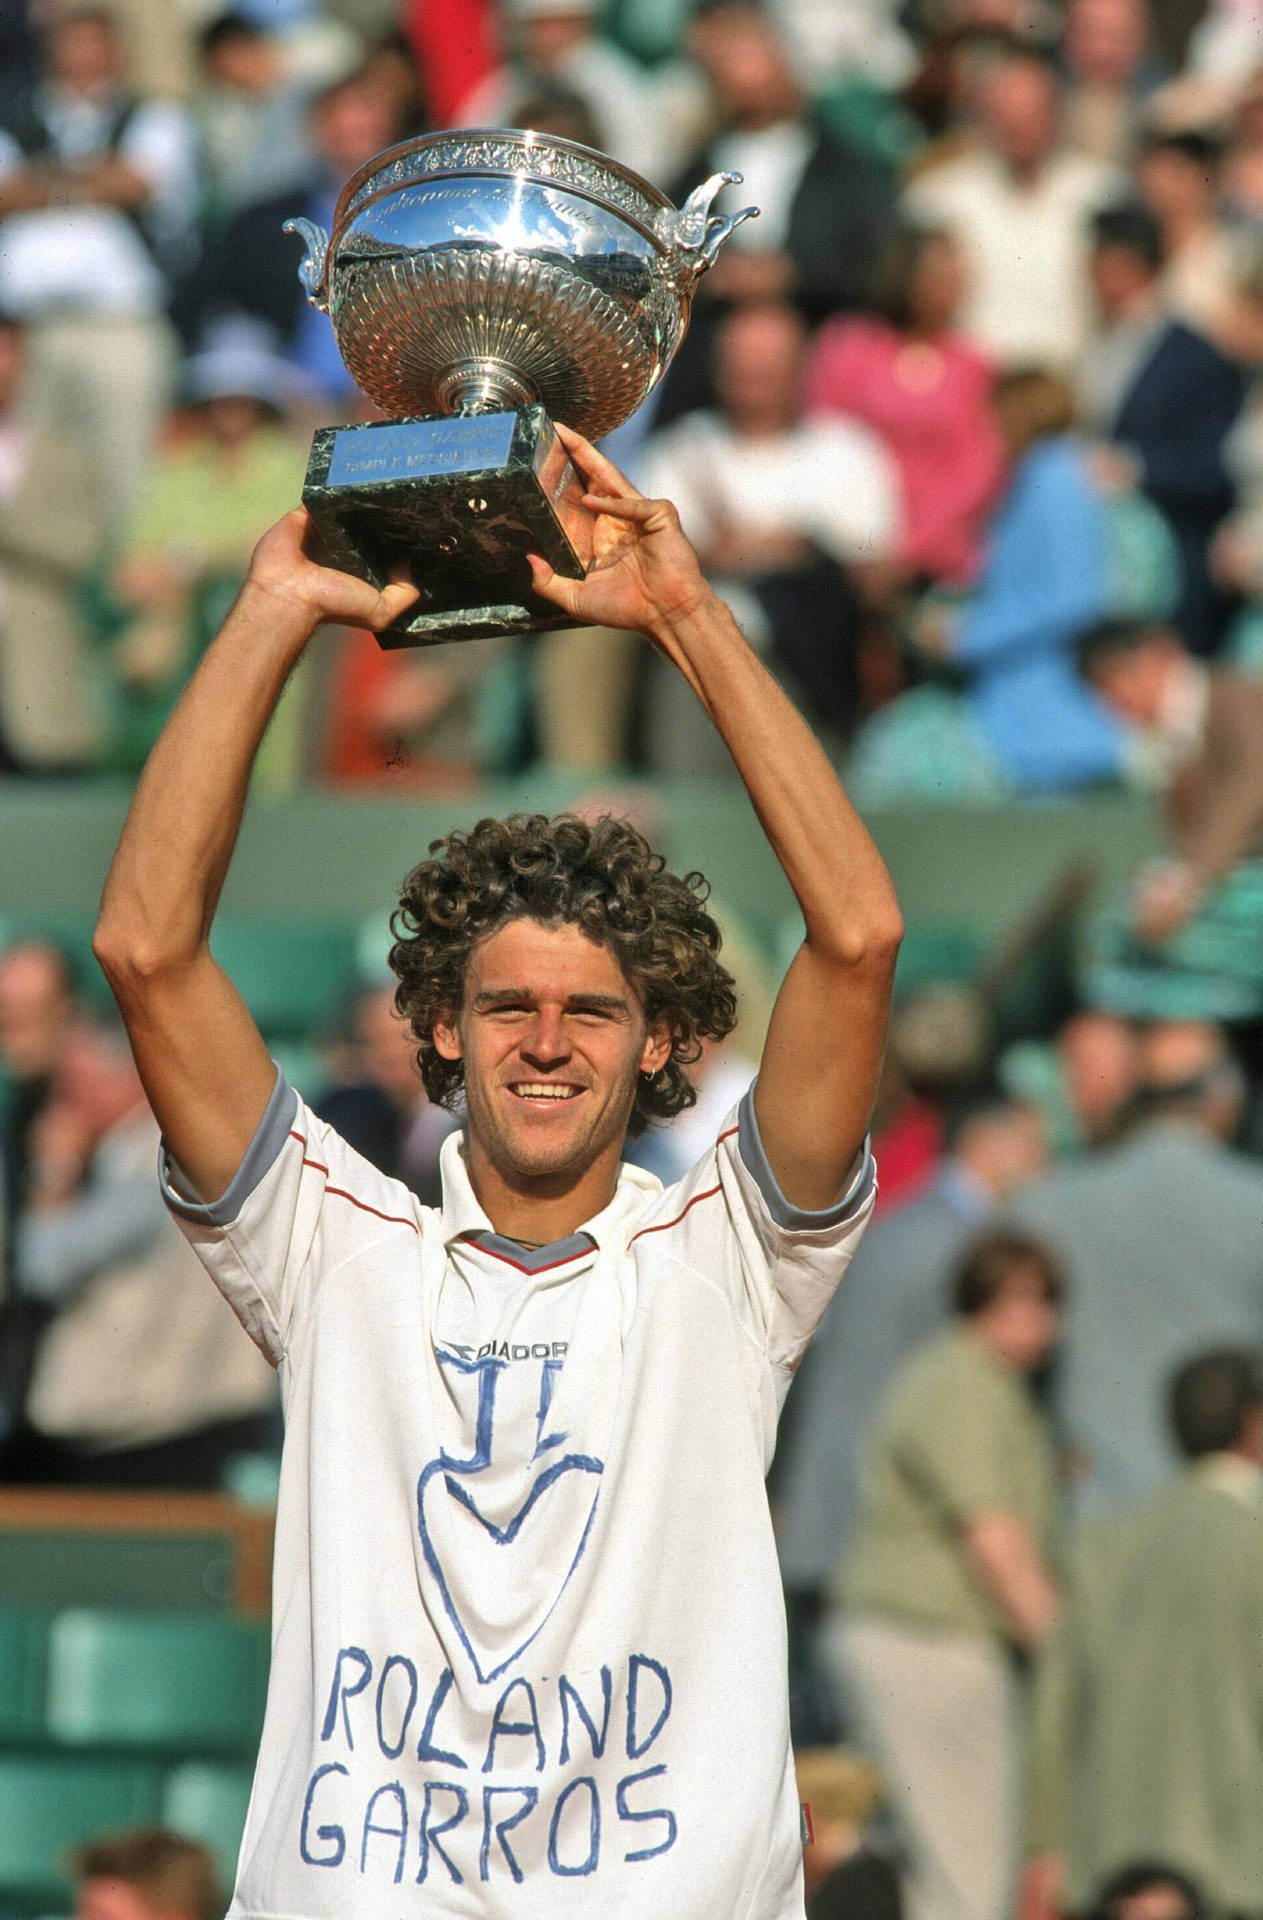 Gustavo Kuerten jubilantly lifting a trophy after a match victory. Wallpaper